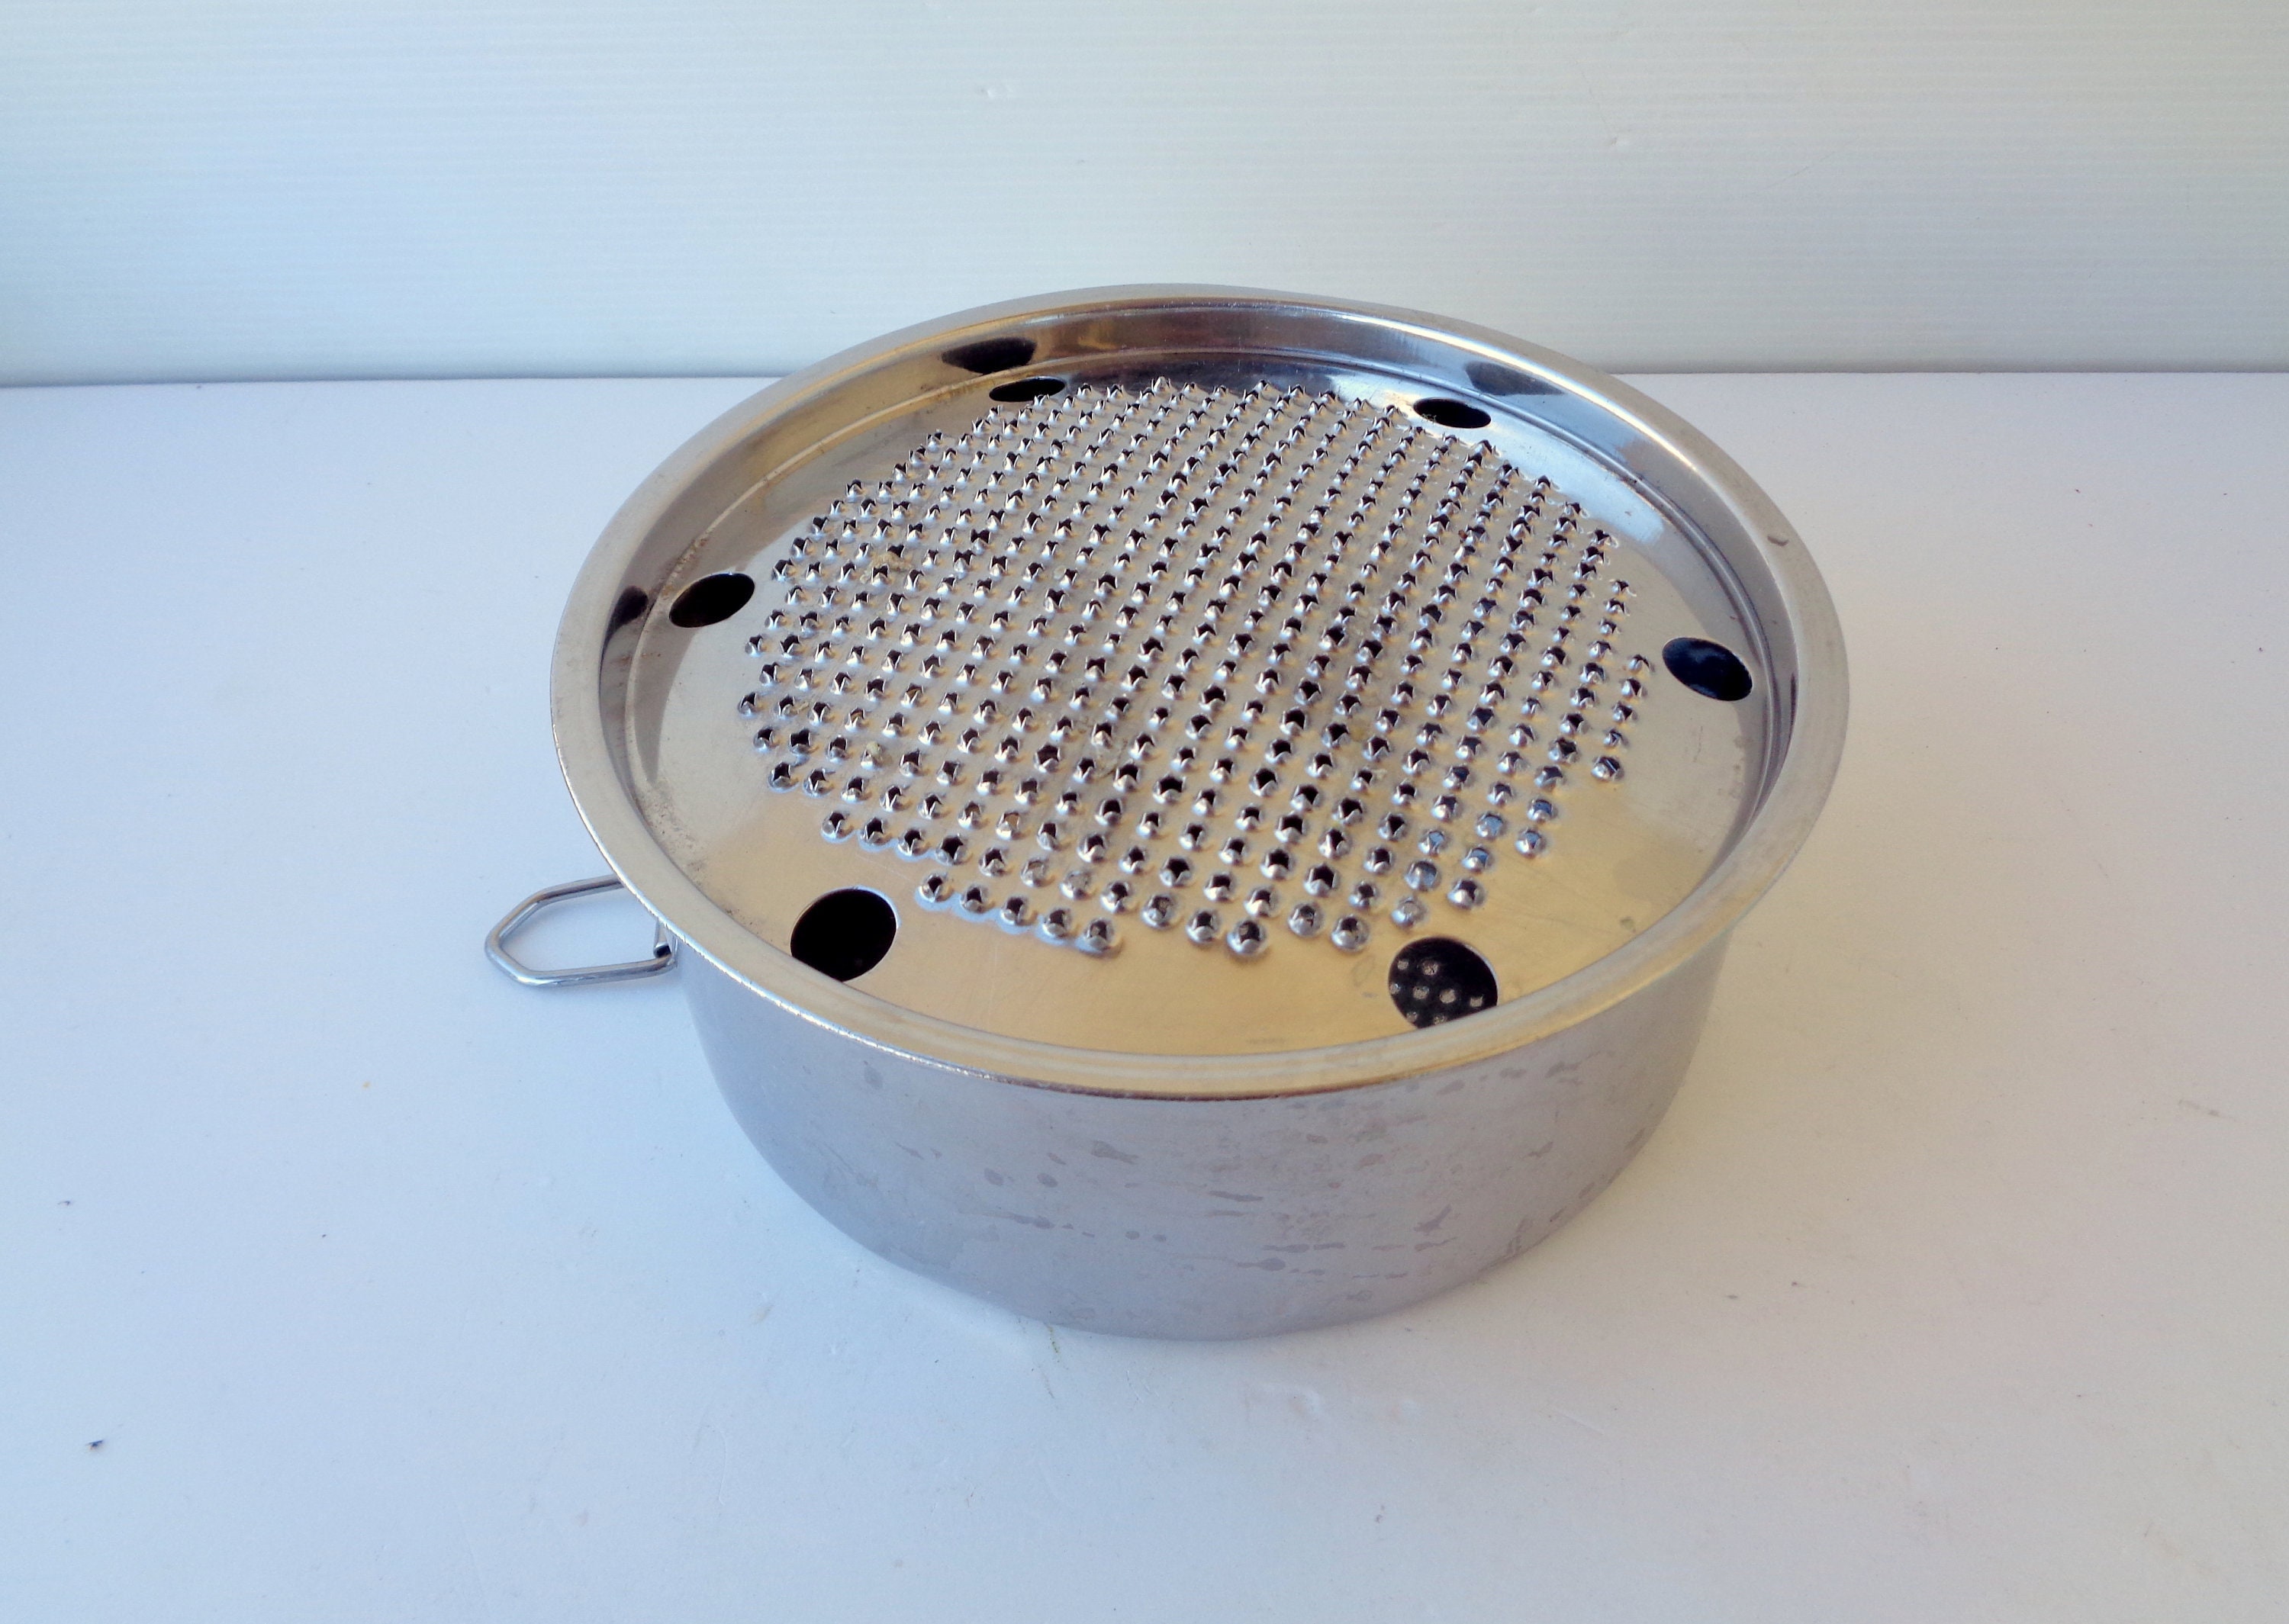 Vintage 1980s Italian Round Steel Cheese Grater Box for Parmesan Cheese.  Cheese Holder Bowl With Grater Lid, Quality of the Past 